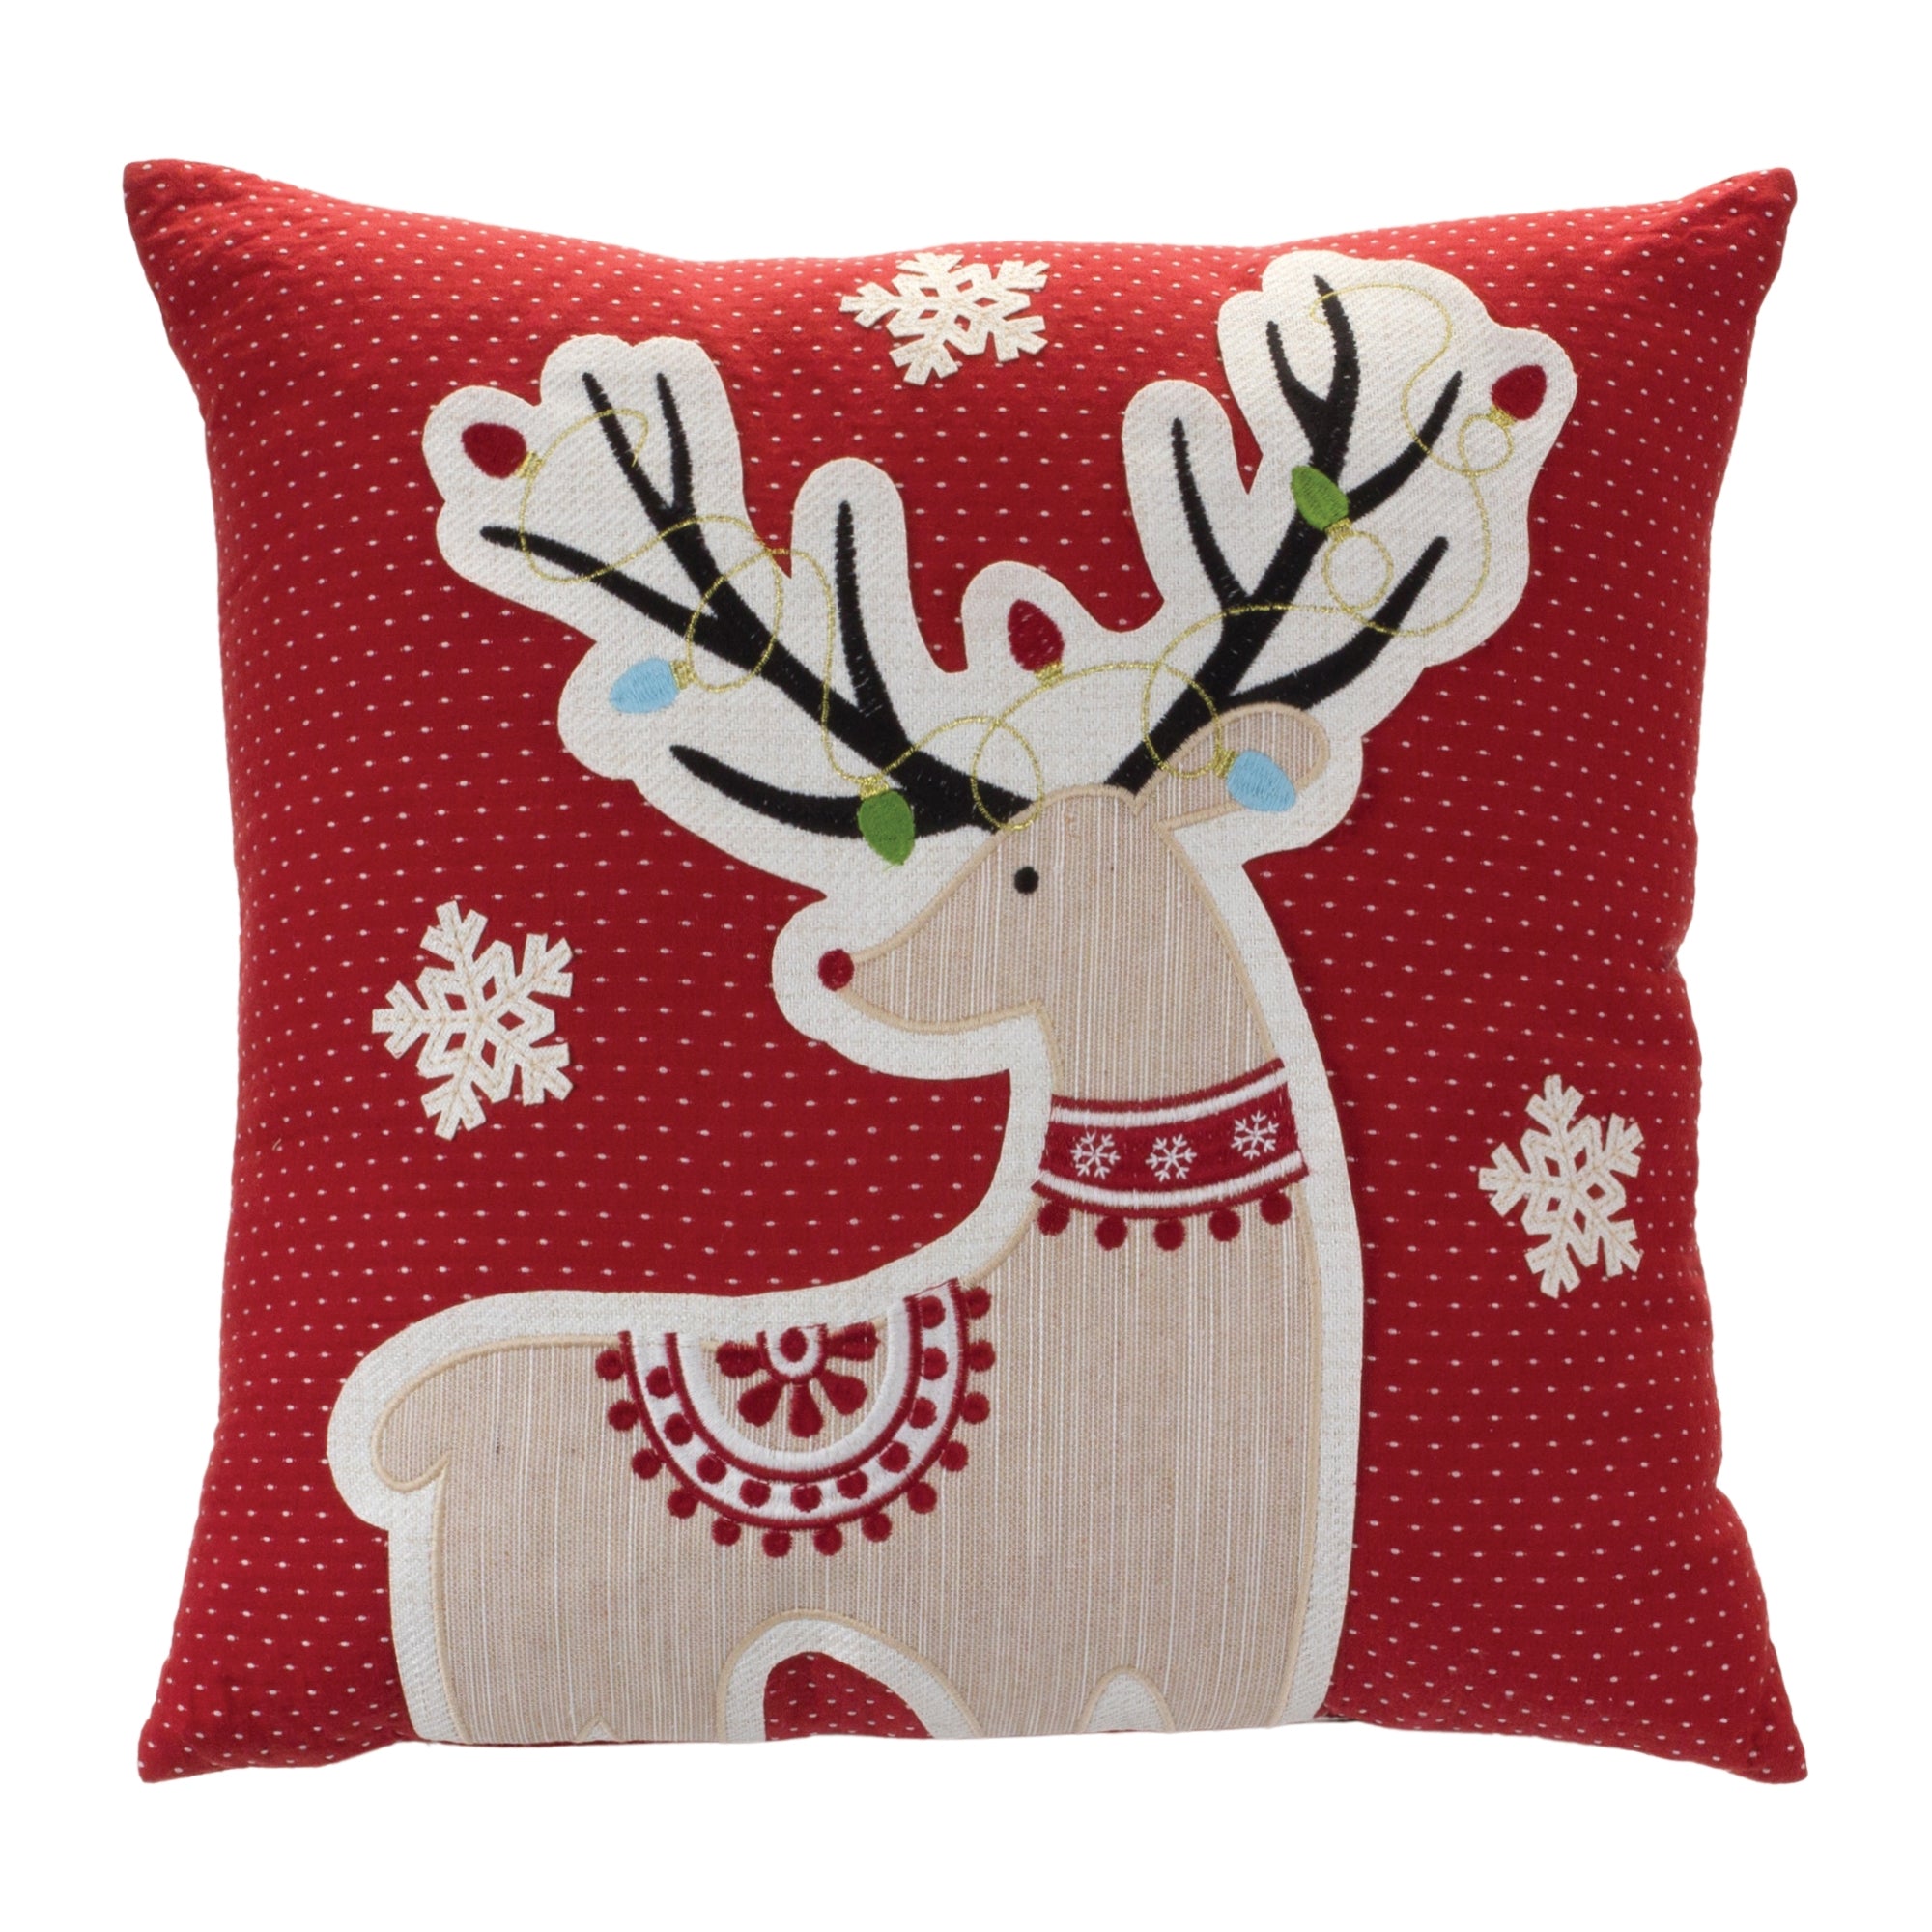 Embroidered Reindeer Throw Pillow 16"SQ